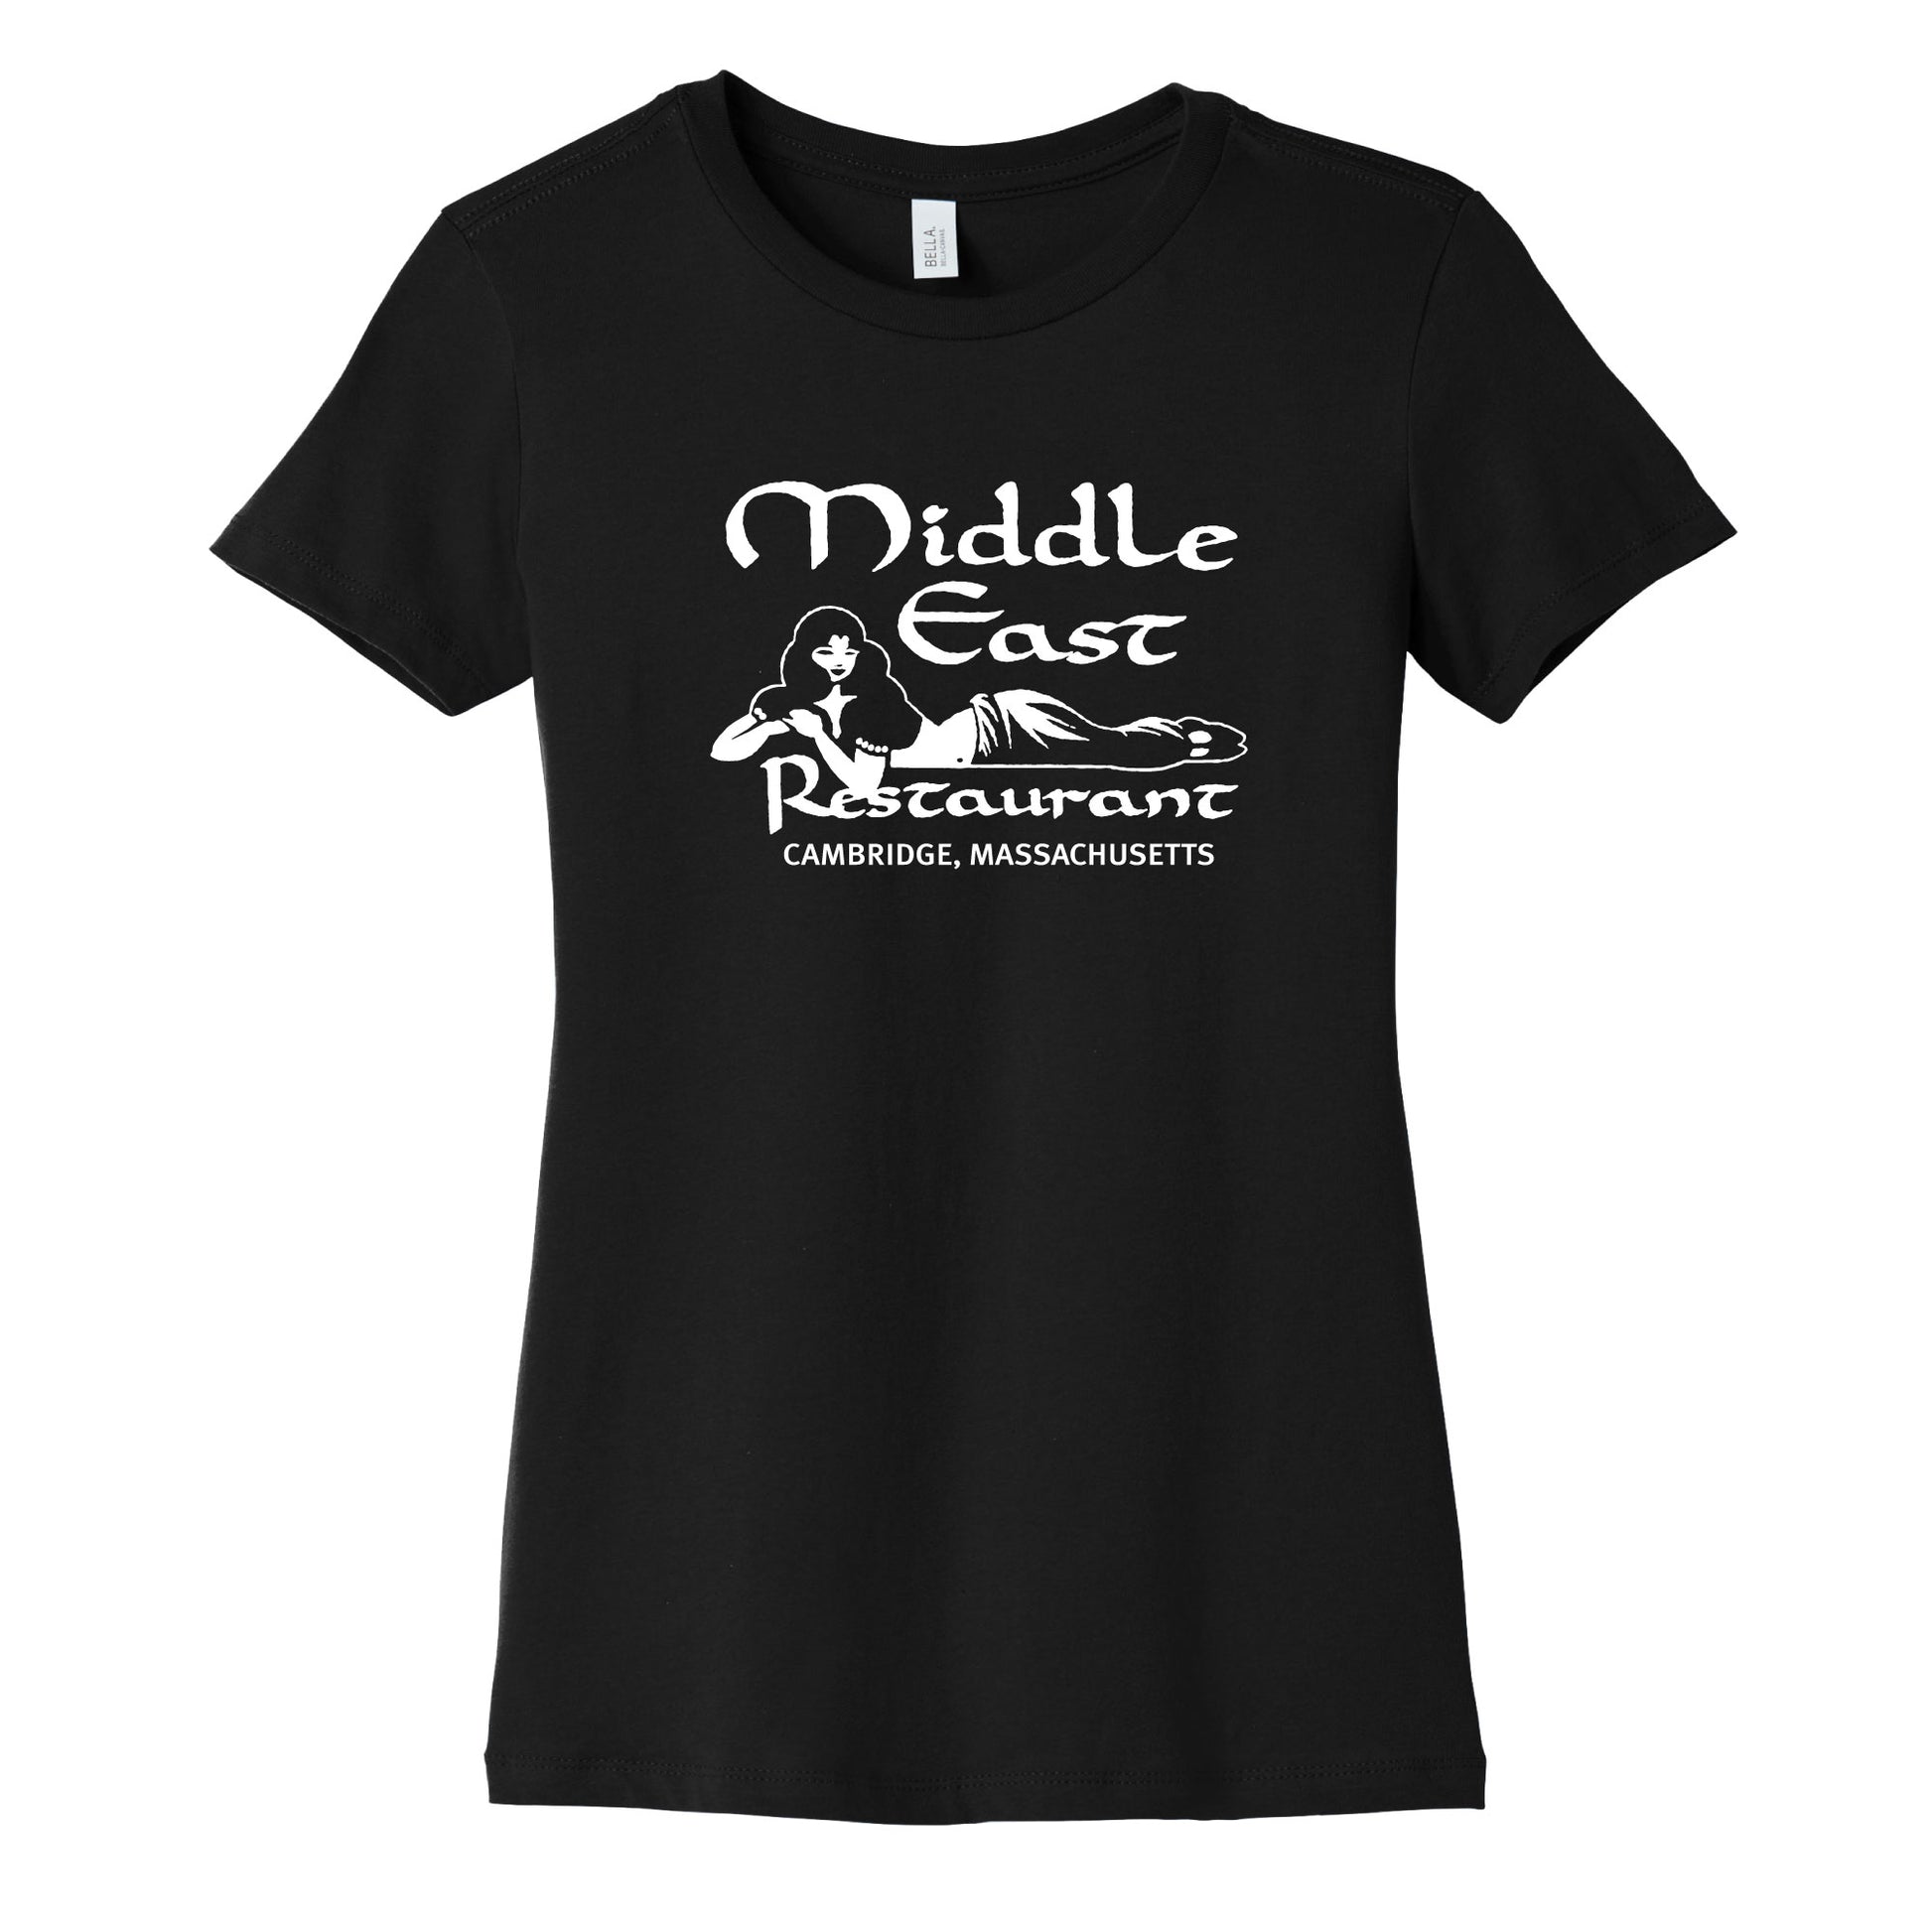 a black, 100% cotton,  women's cut t-shirt with  a print of the logo of The Middle East Restaurant and Nightclub in Cambridge, MA 